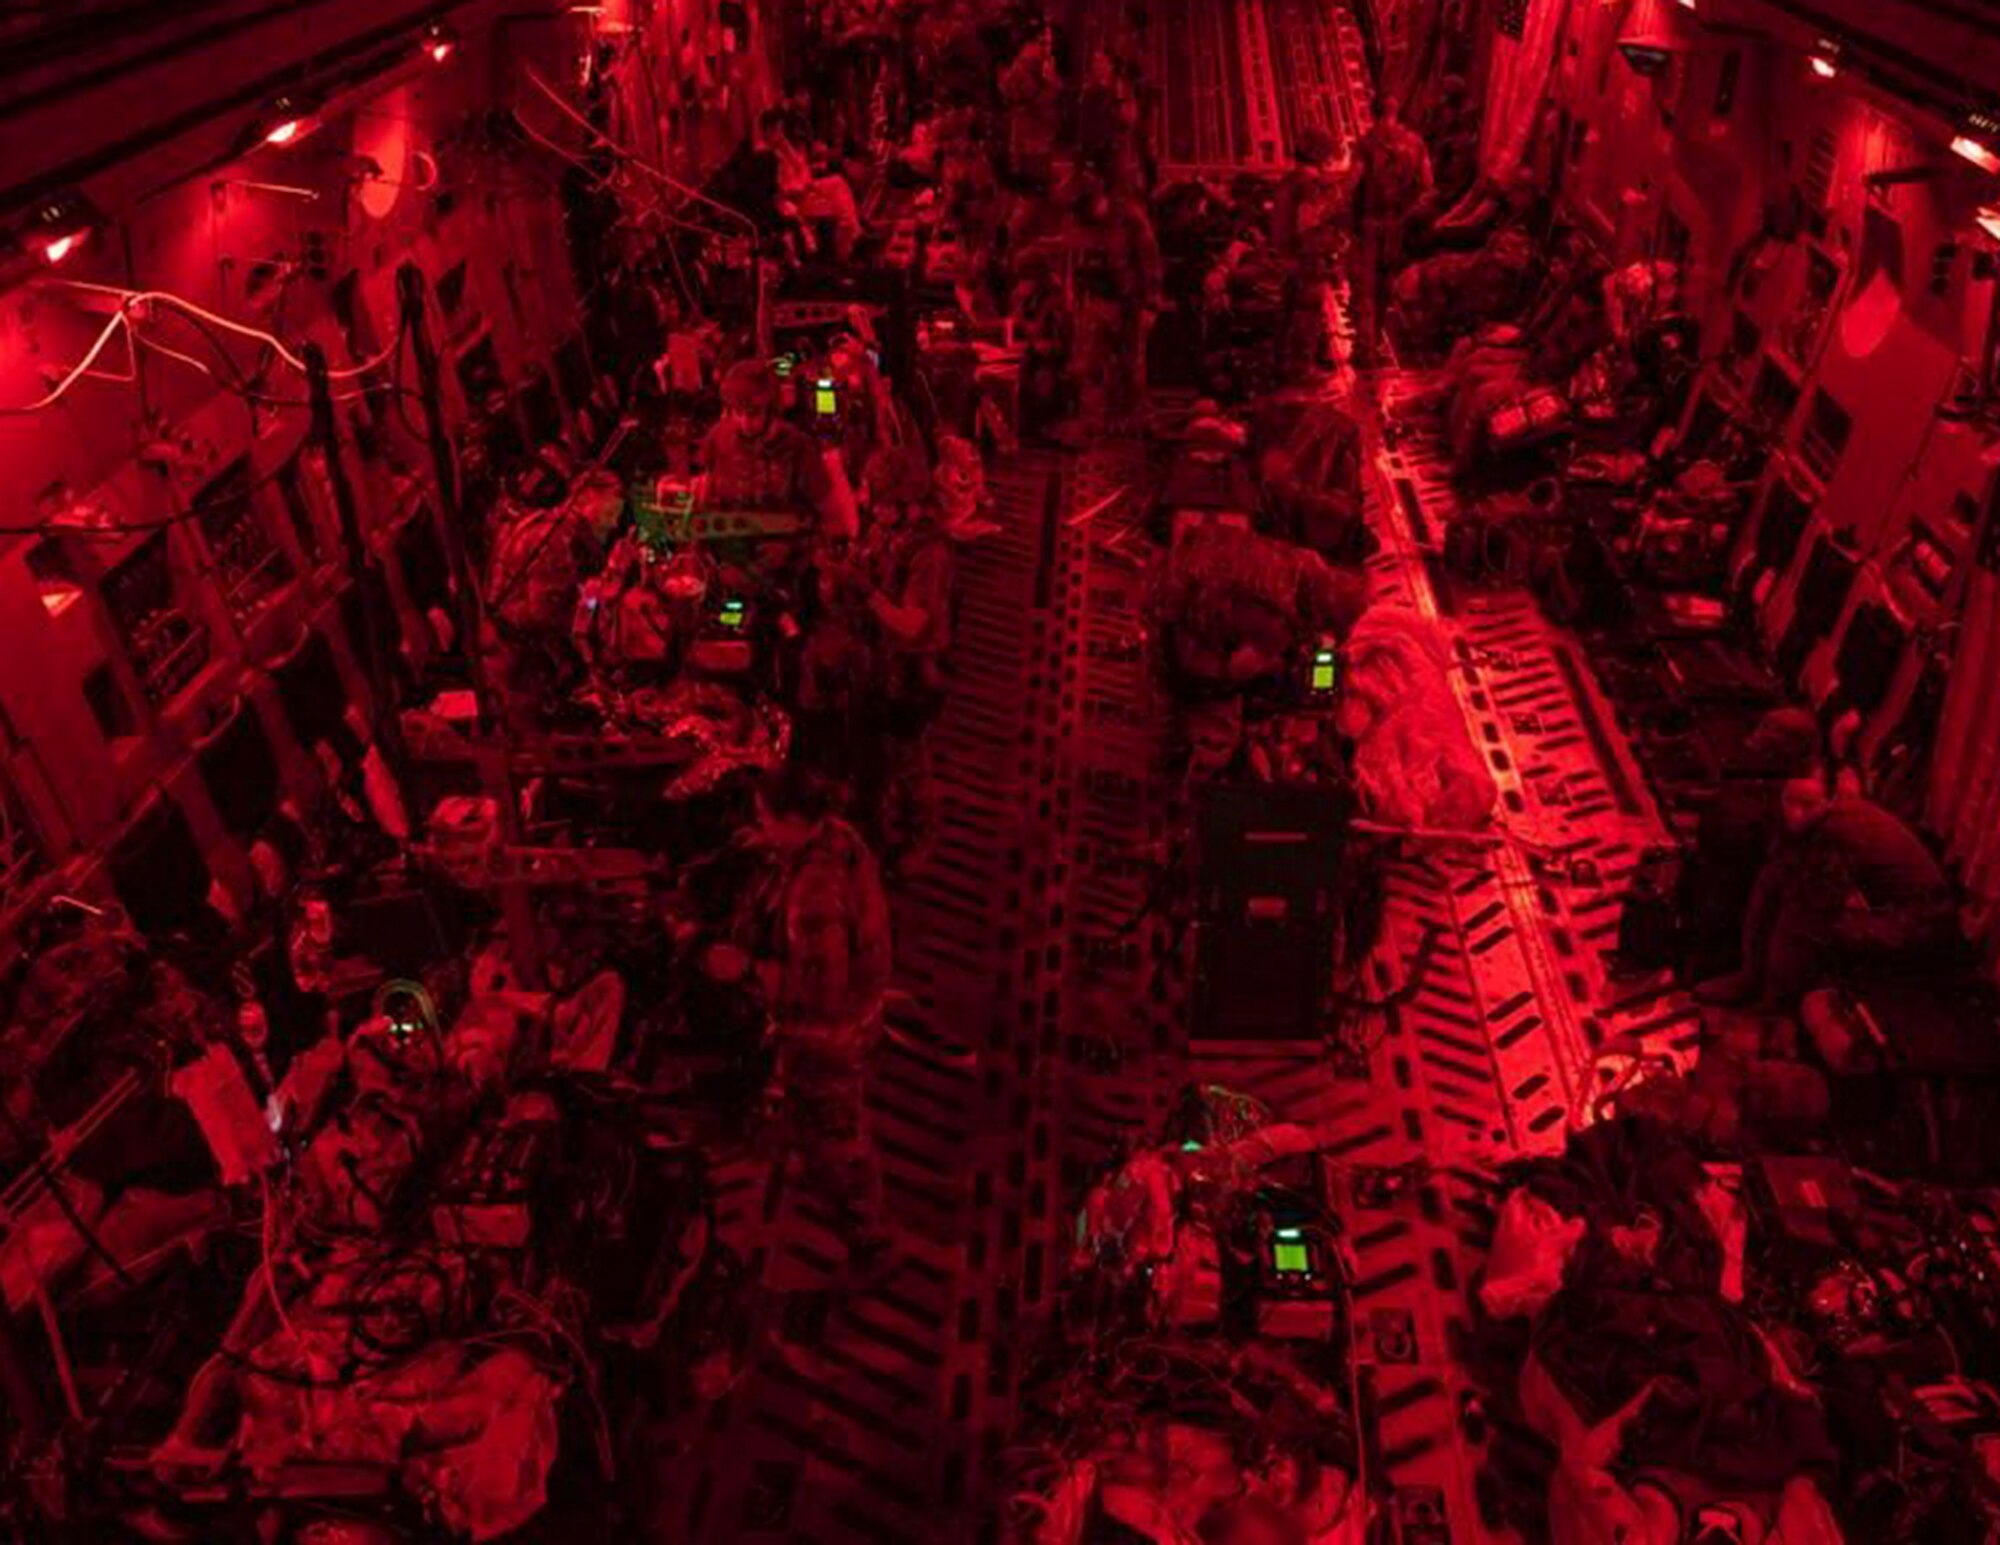 U.S. Air Force Airmen from the 379th Expeditionary Aeromedical Evacuation Squadron provide medical care on a C-17 Globemaster III over the skies of U.S. Central Command, Aug. 26, 2021.